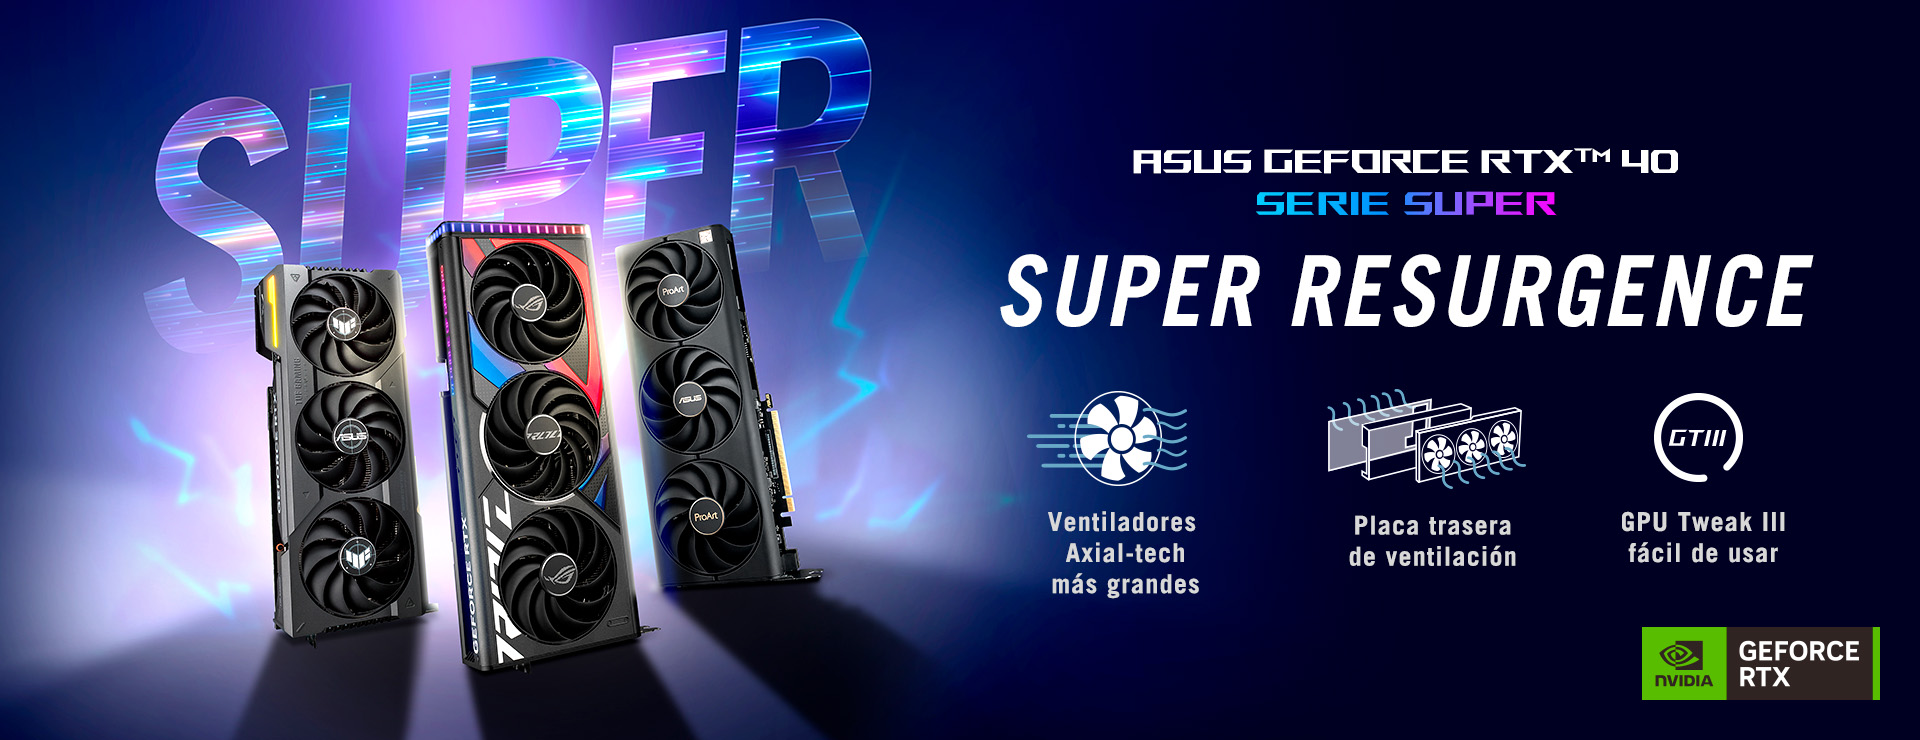 ASUS GEFORCE RTX 40 SERIES GRAPHICS CARDS